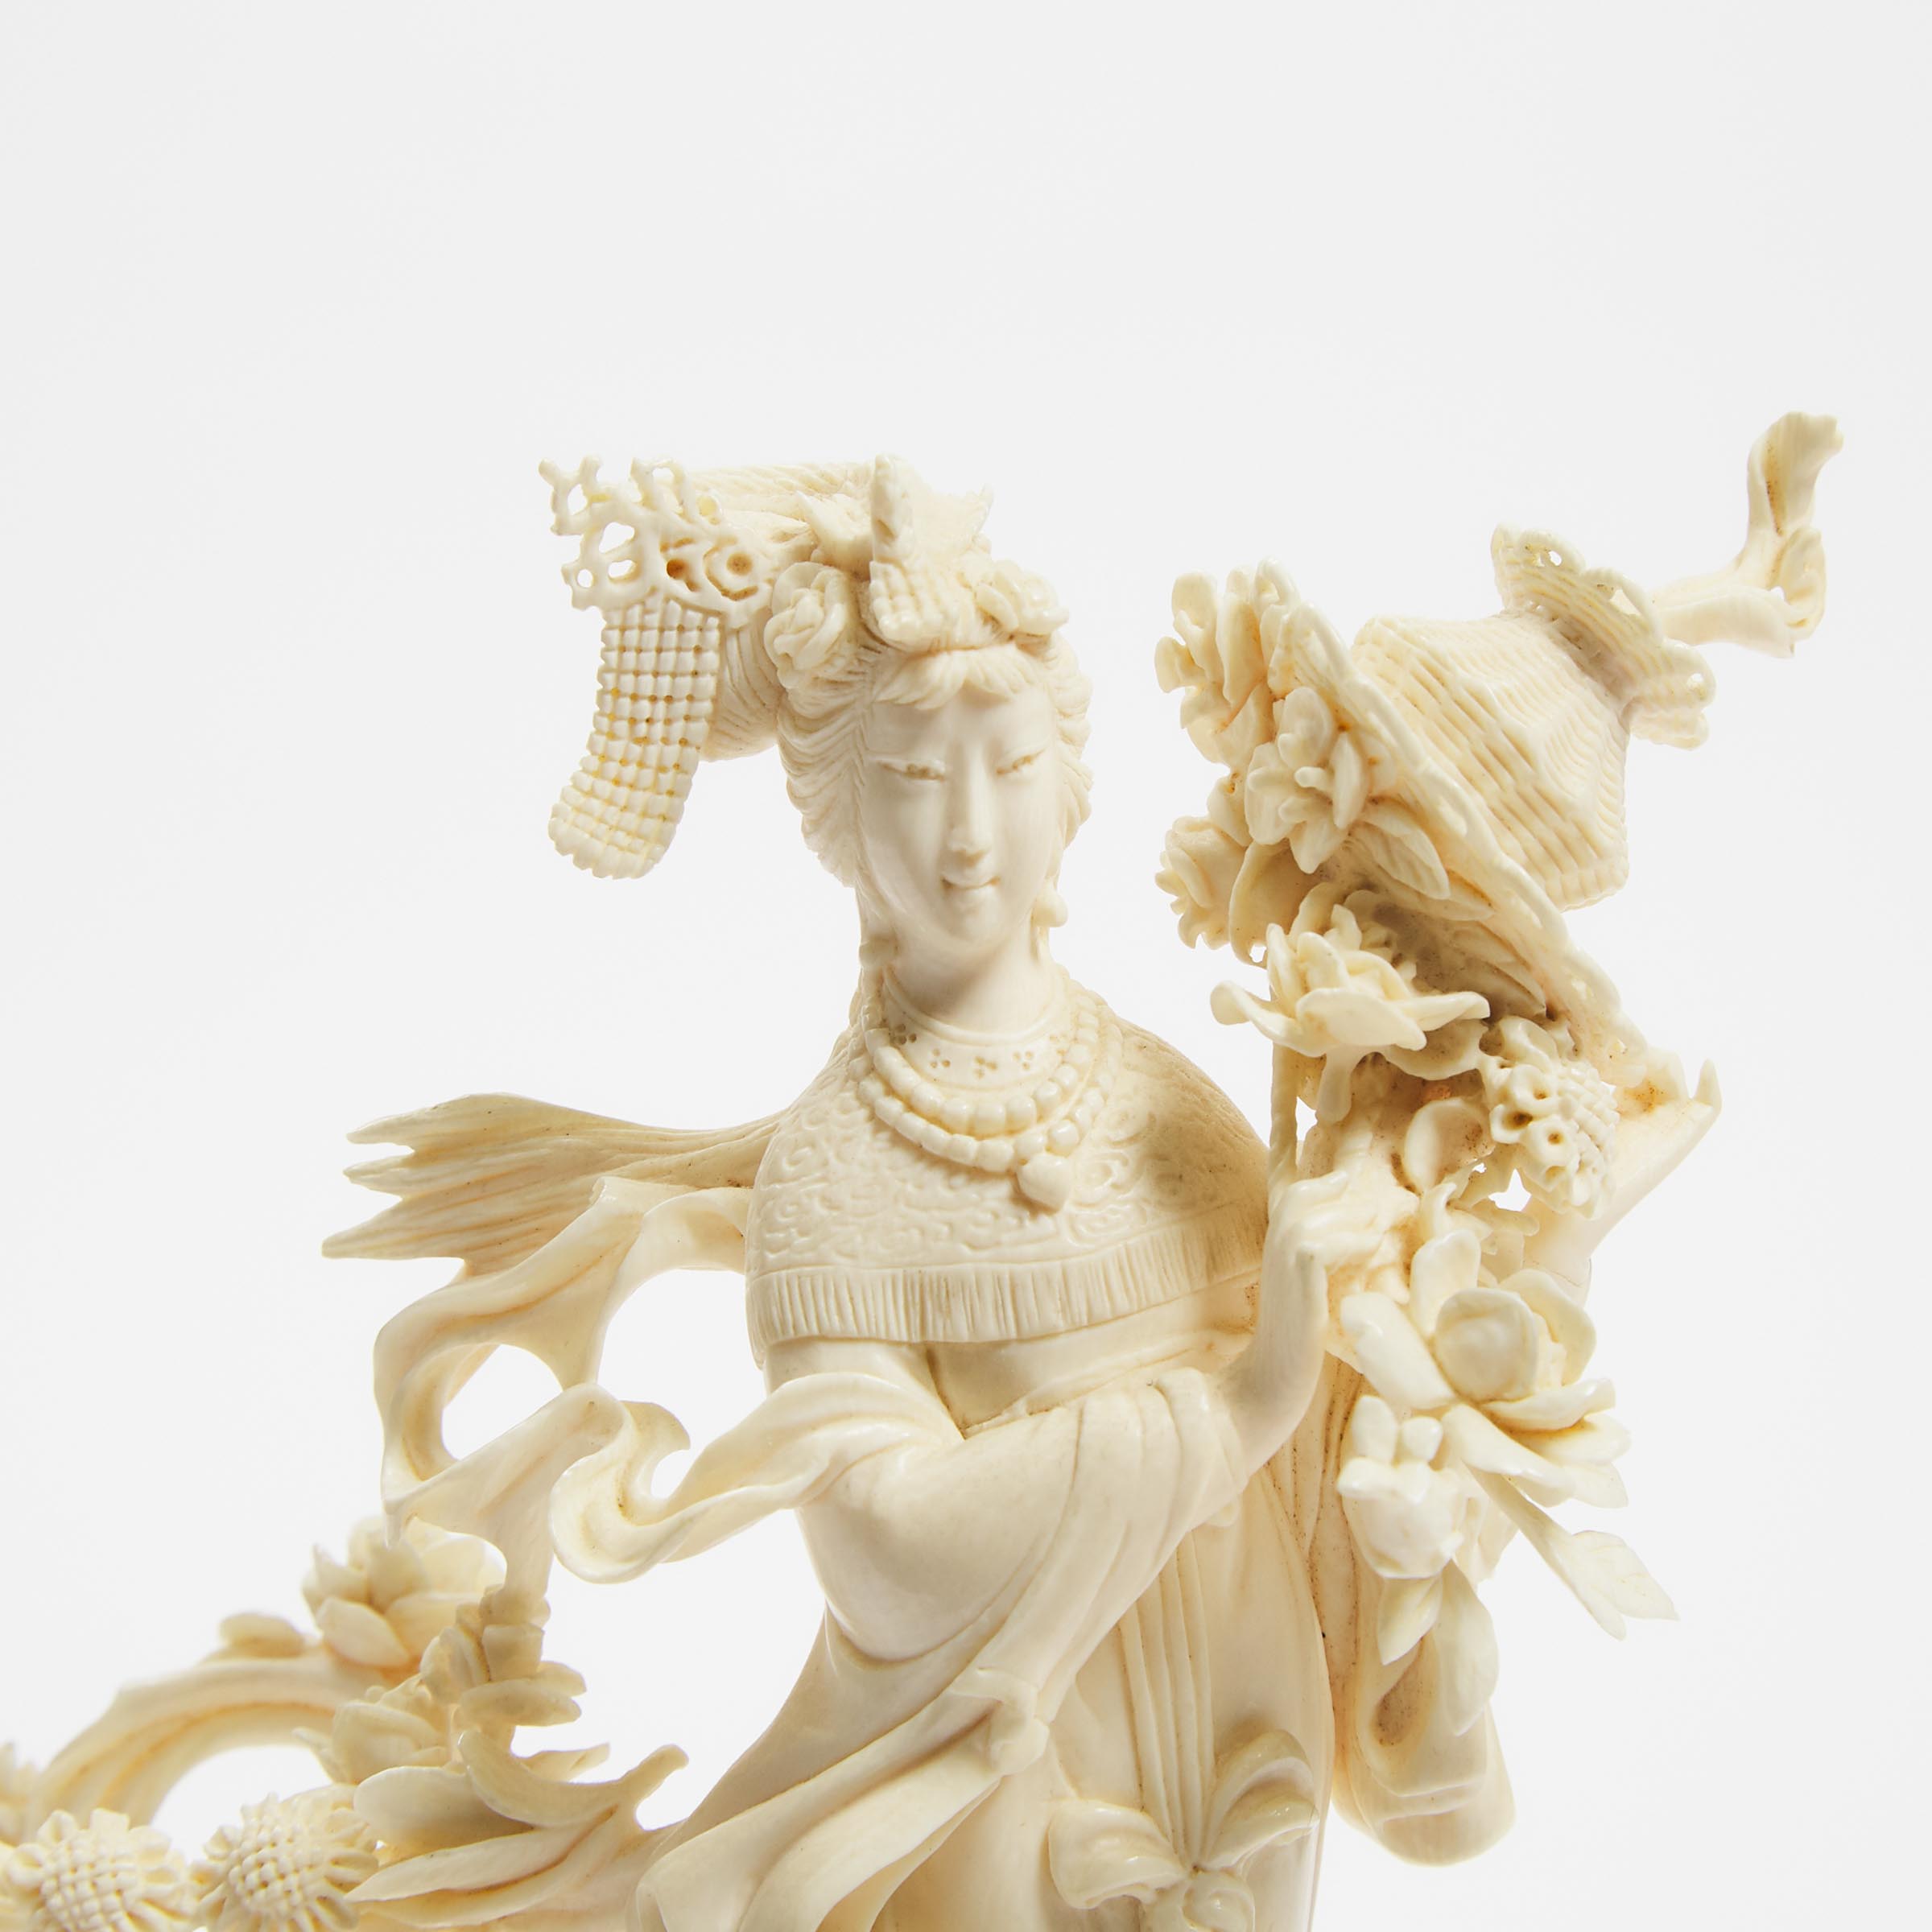 An Ivory Figure of a Female Immortal, Mid 20th Century